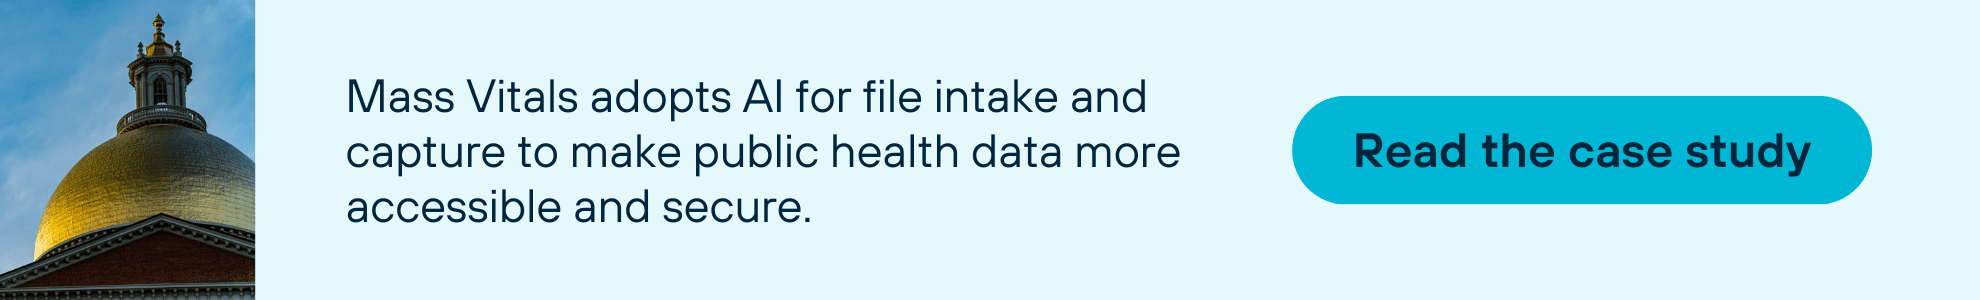 Read how Mass Vitals adopted AI for file intake and capture to make public health data more accessible and secure.